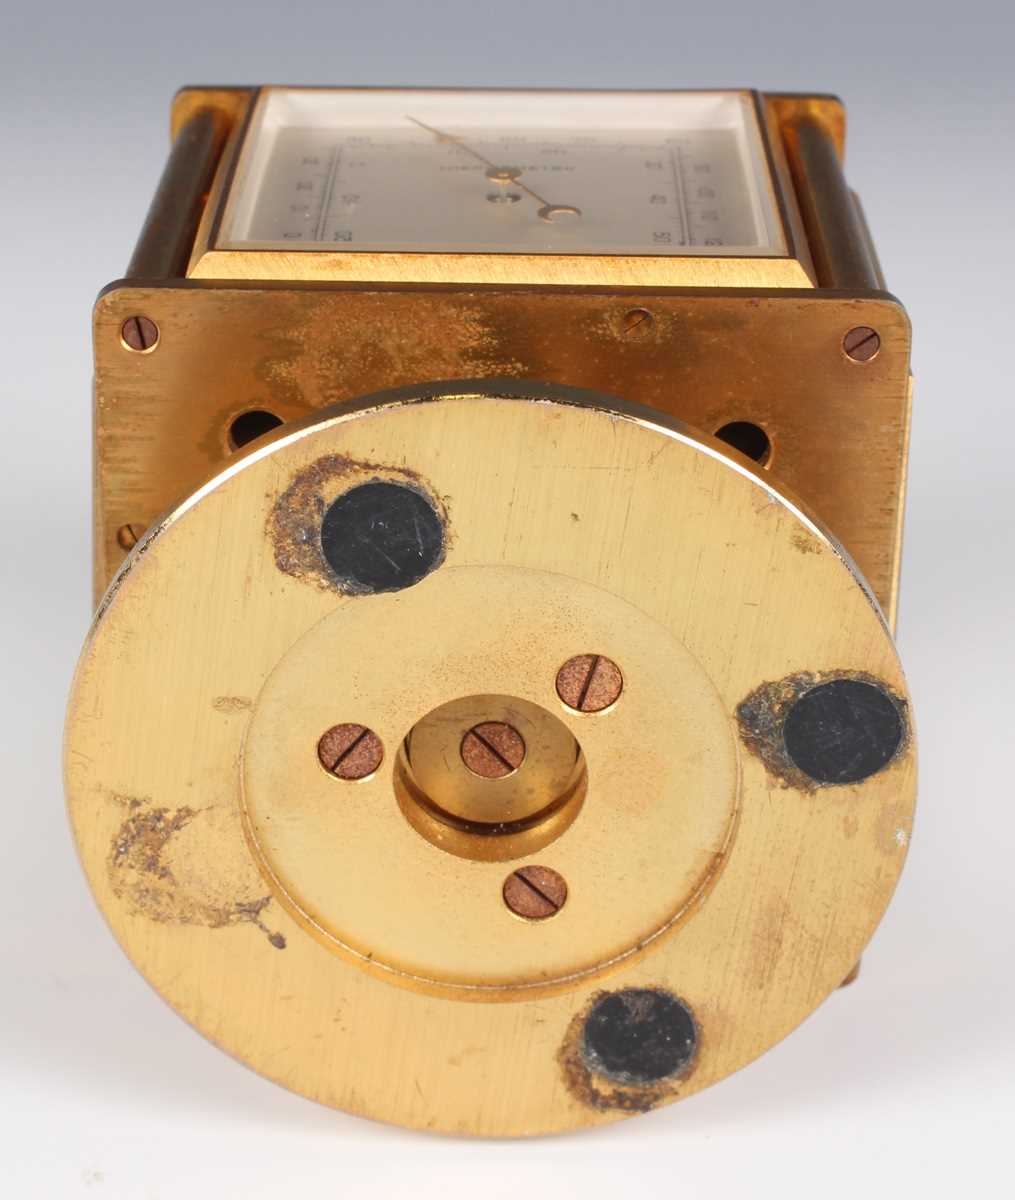 A mid-20th century Imhof gilt brass desk timepiece and weather compendium, the revolving cube shaped - Image 13 of 15